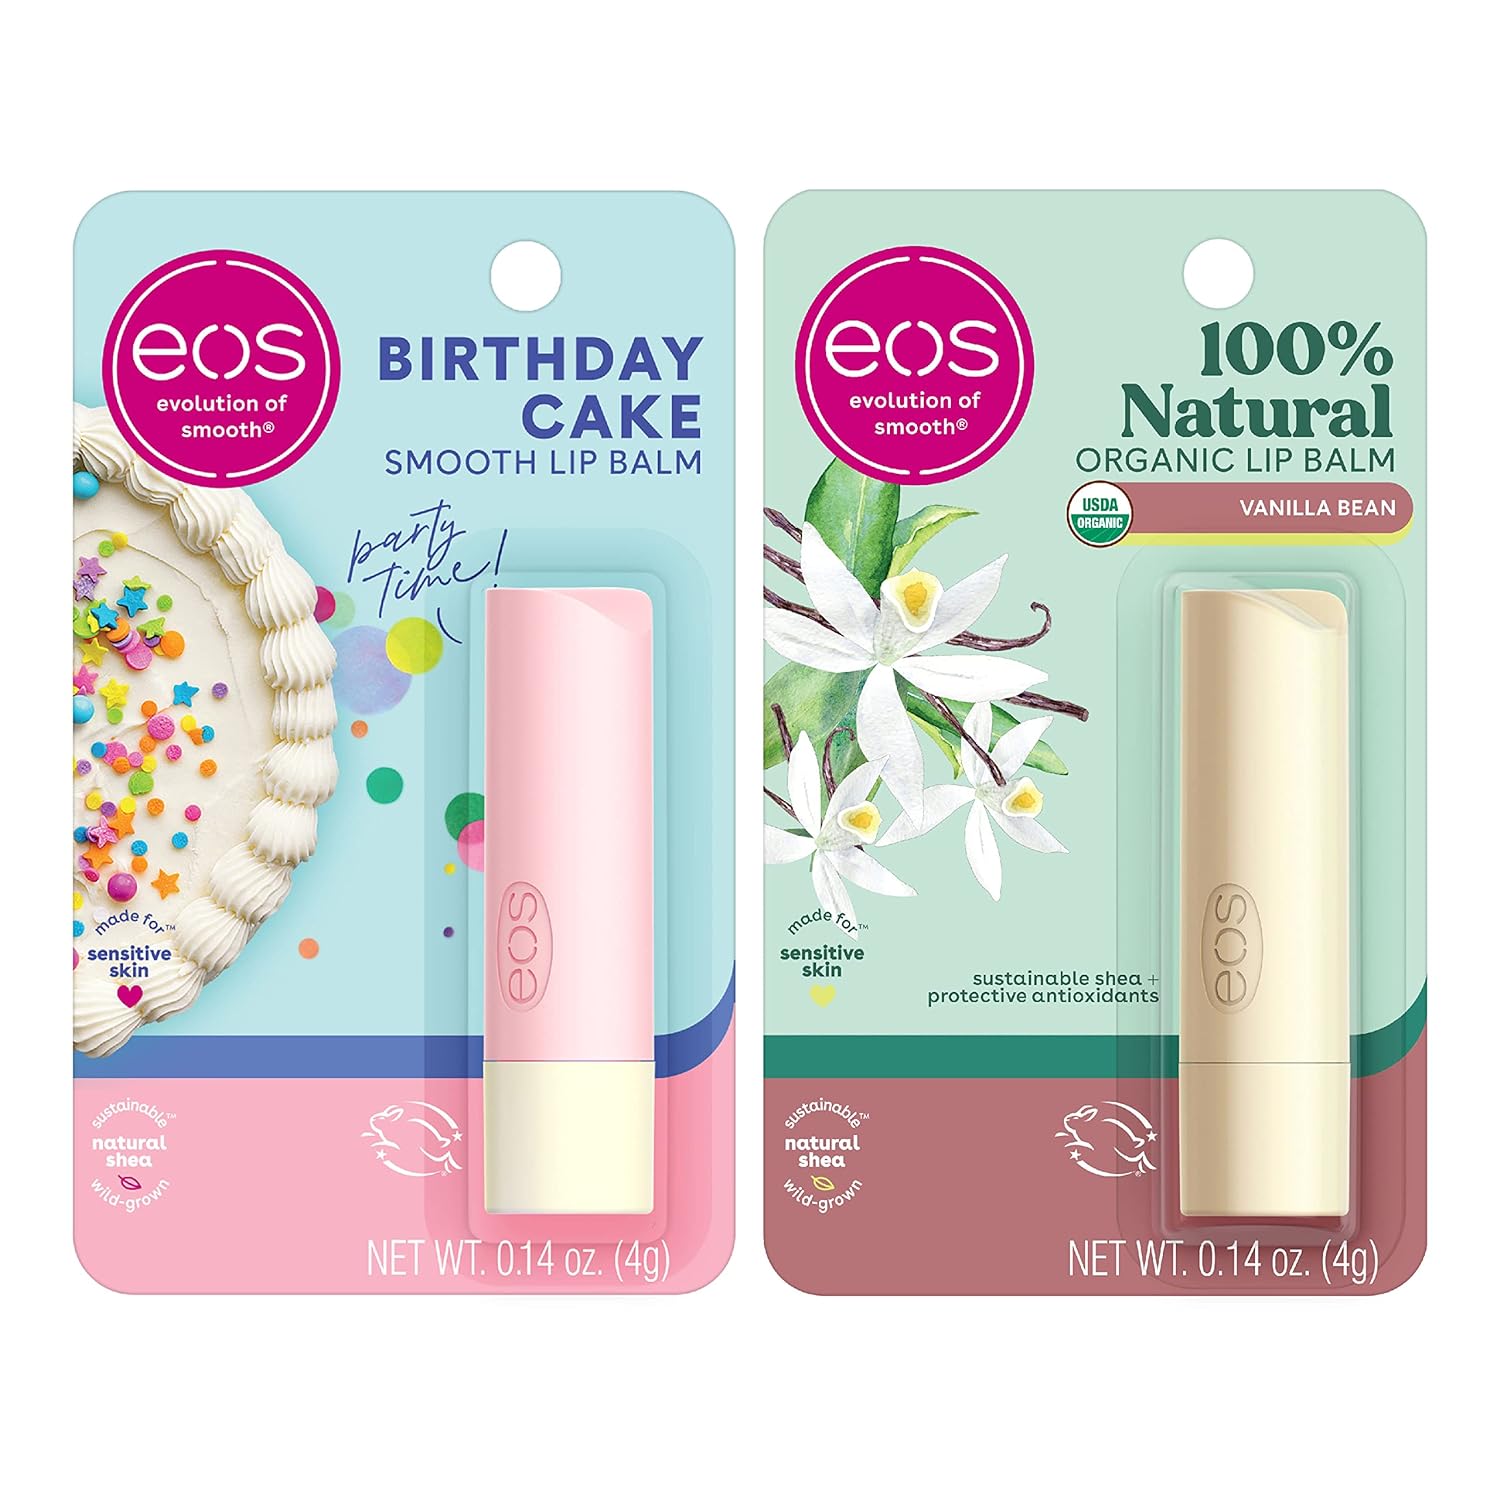 eos Birthday Bundle- Vanilla Bean Birthday Cake | Dermatologist Recommended for Sensitive Skin | All-Day Moisture Lip Care Products